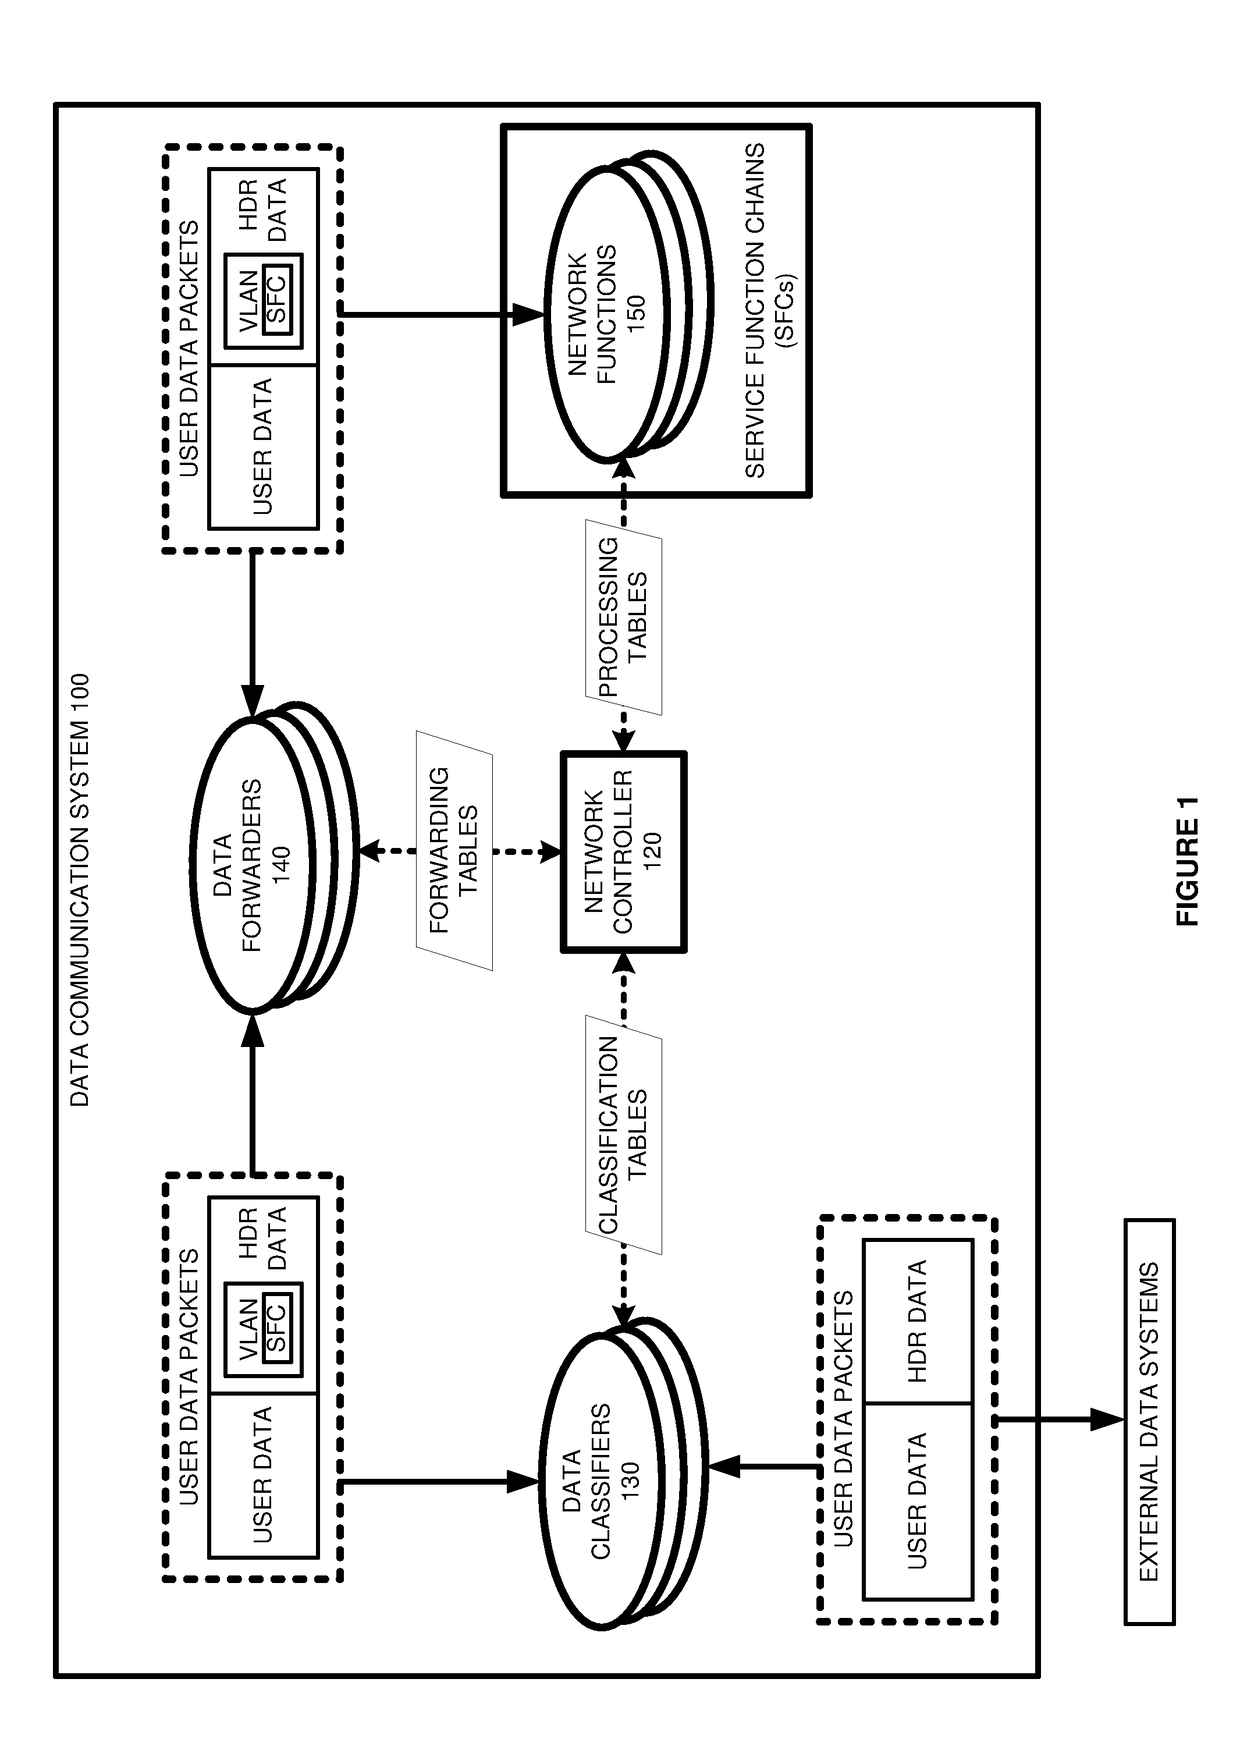 Service function chain (SFC) data communications with sfc data in virtual local area network identifier (vlan id) data fields